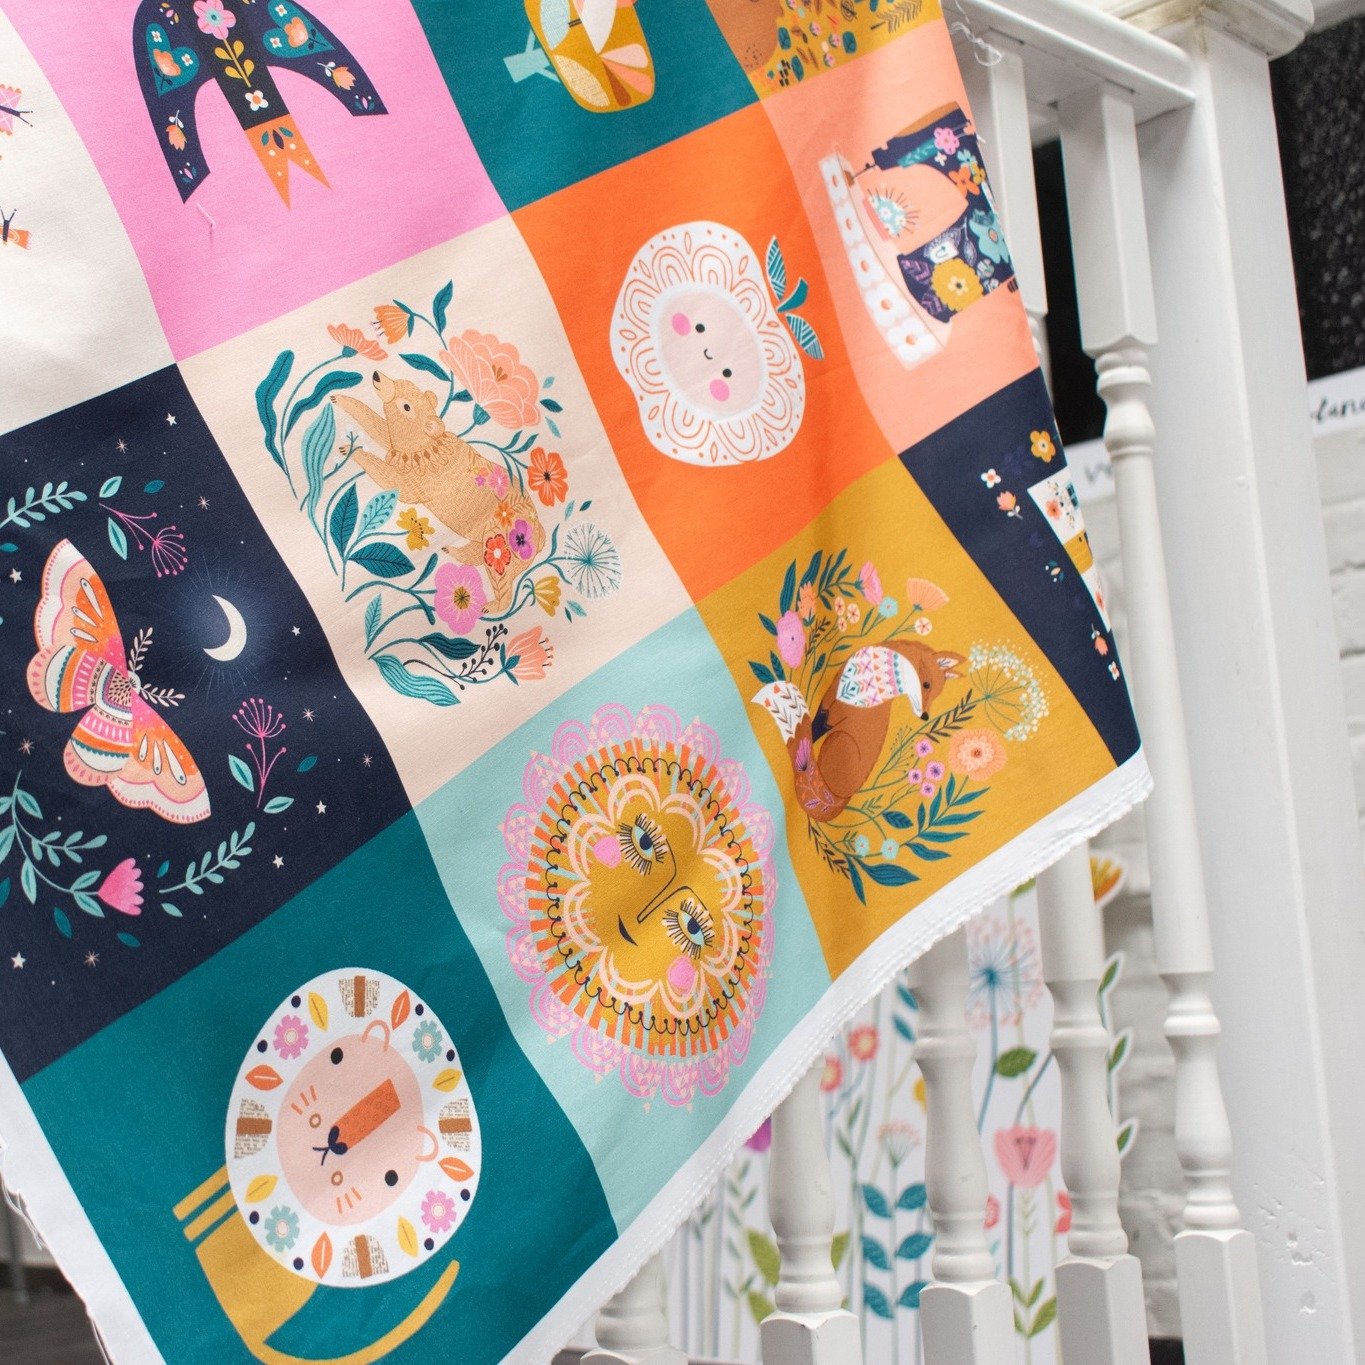 The possibilities are endless with the Decades panel - celebrating 10 years of Dashwood Studio!  Available in stores near you in June 2024.

#dashwoodstudio #dashwoodstudiousa #dashwoodstudiofabric #ilovedashwoodstudio #brewersewing #Quilts #Quilting